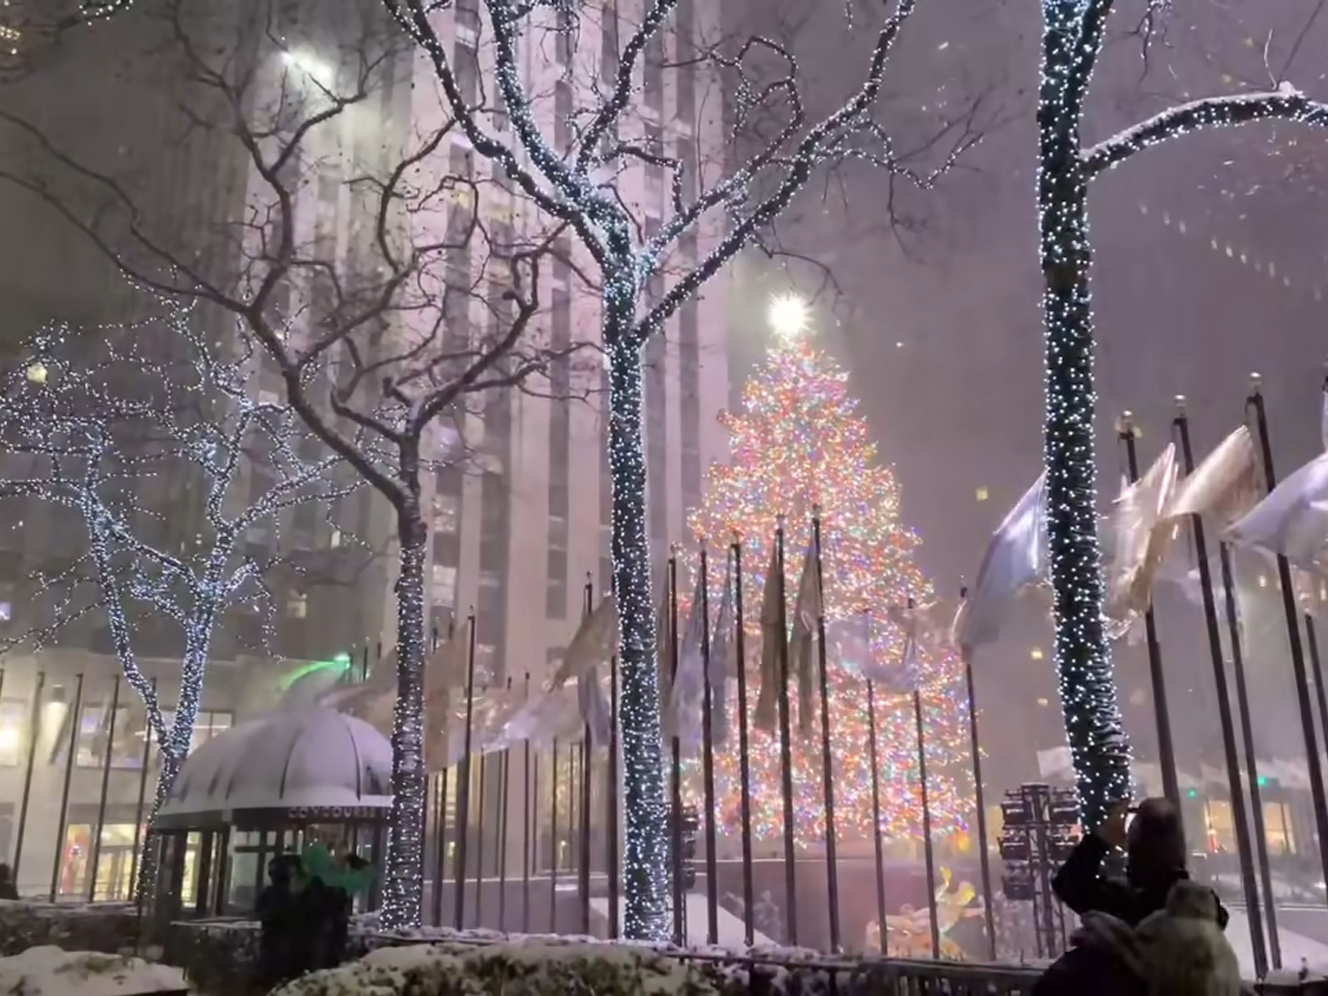 Rockefeller Plaza NYC in a Snow Storm